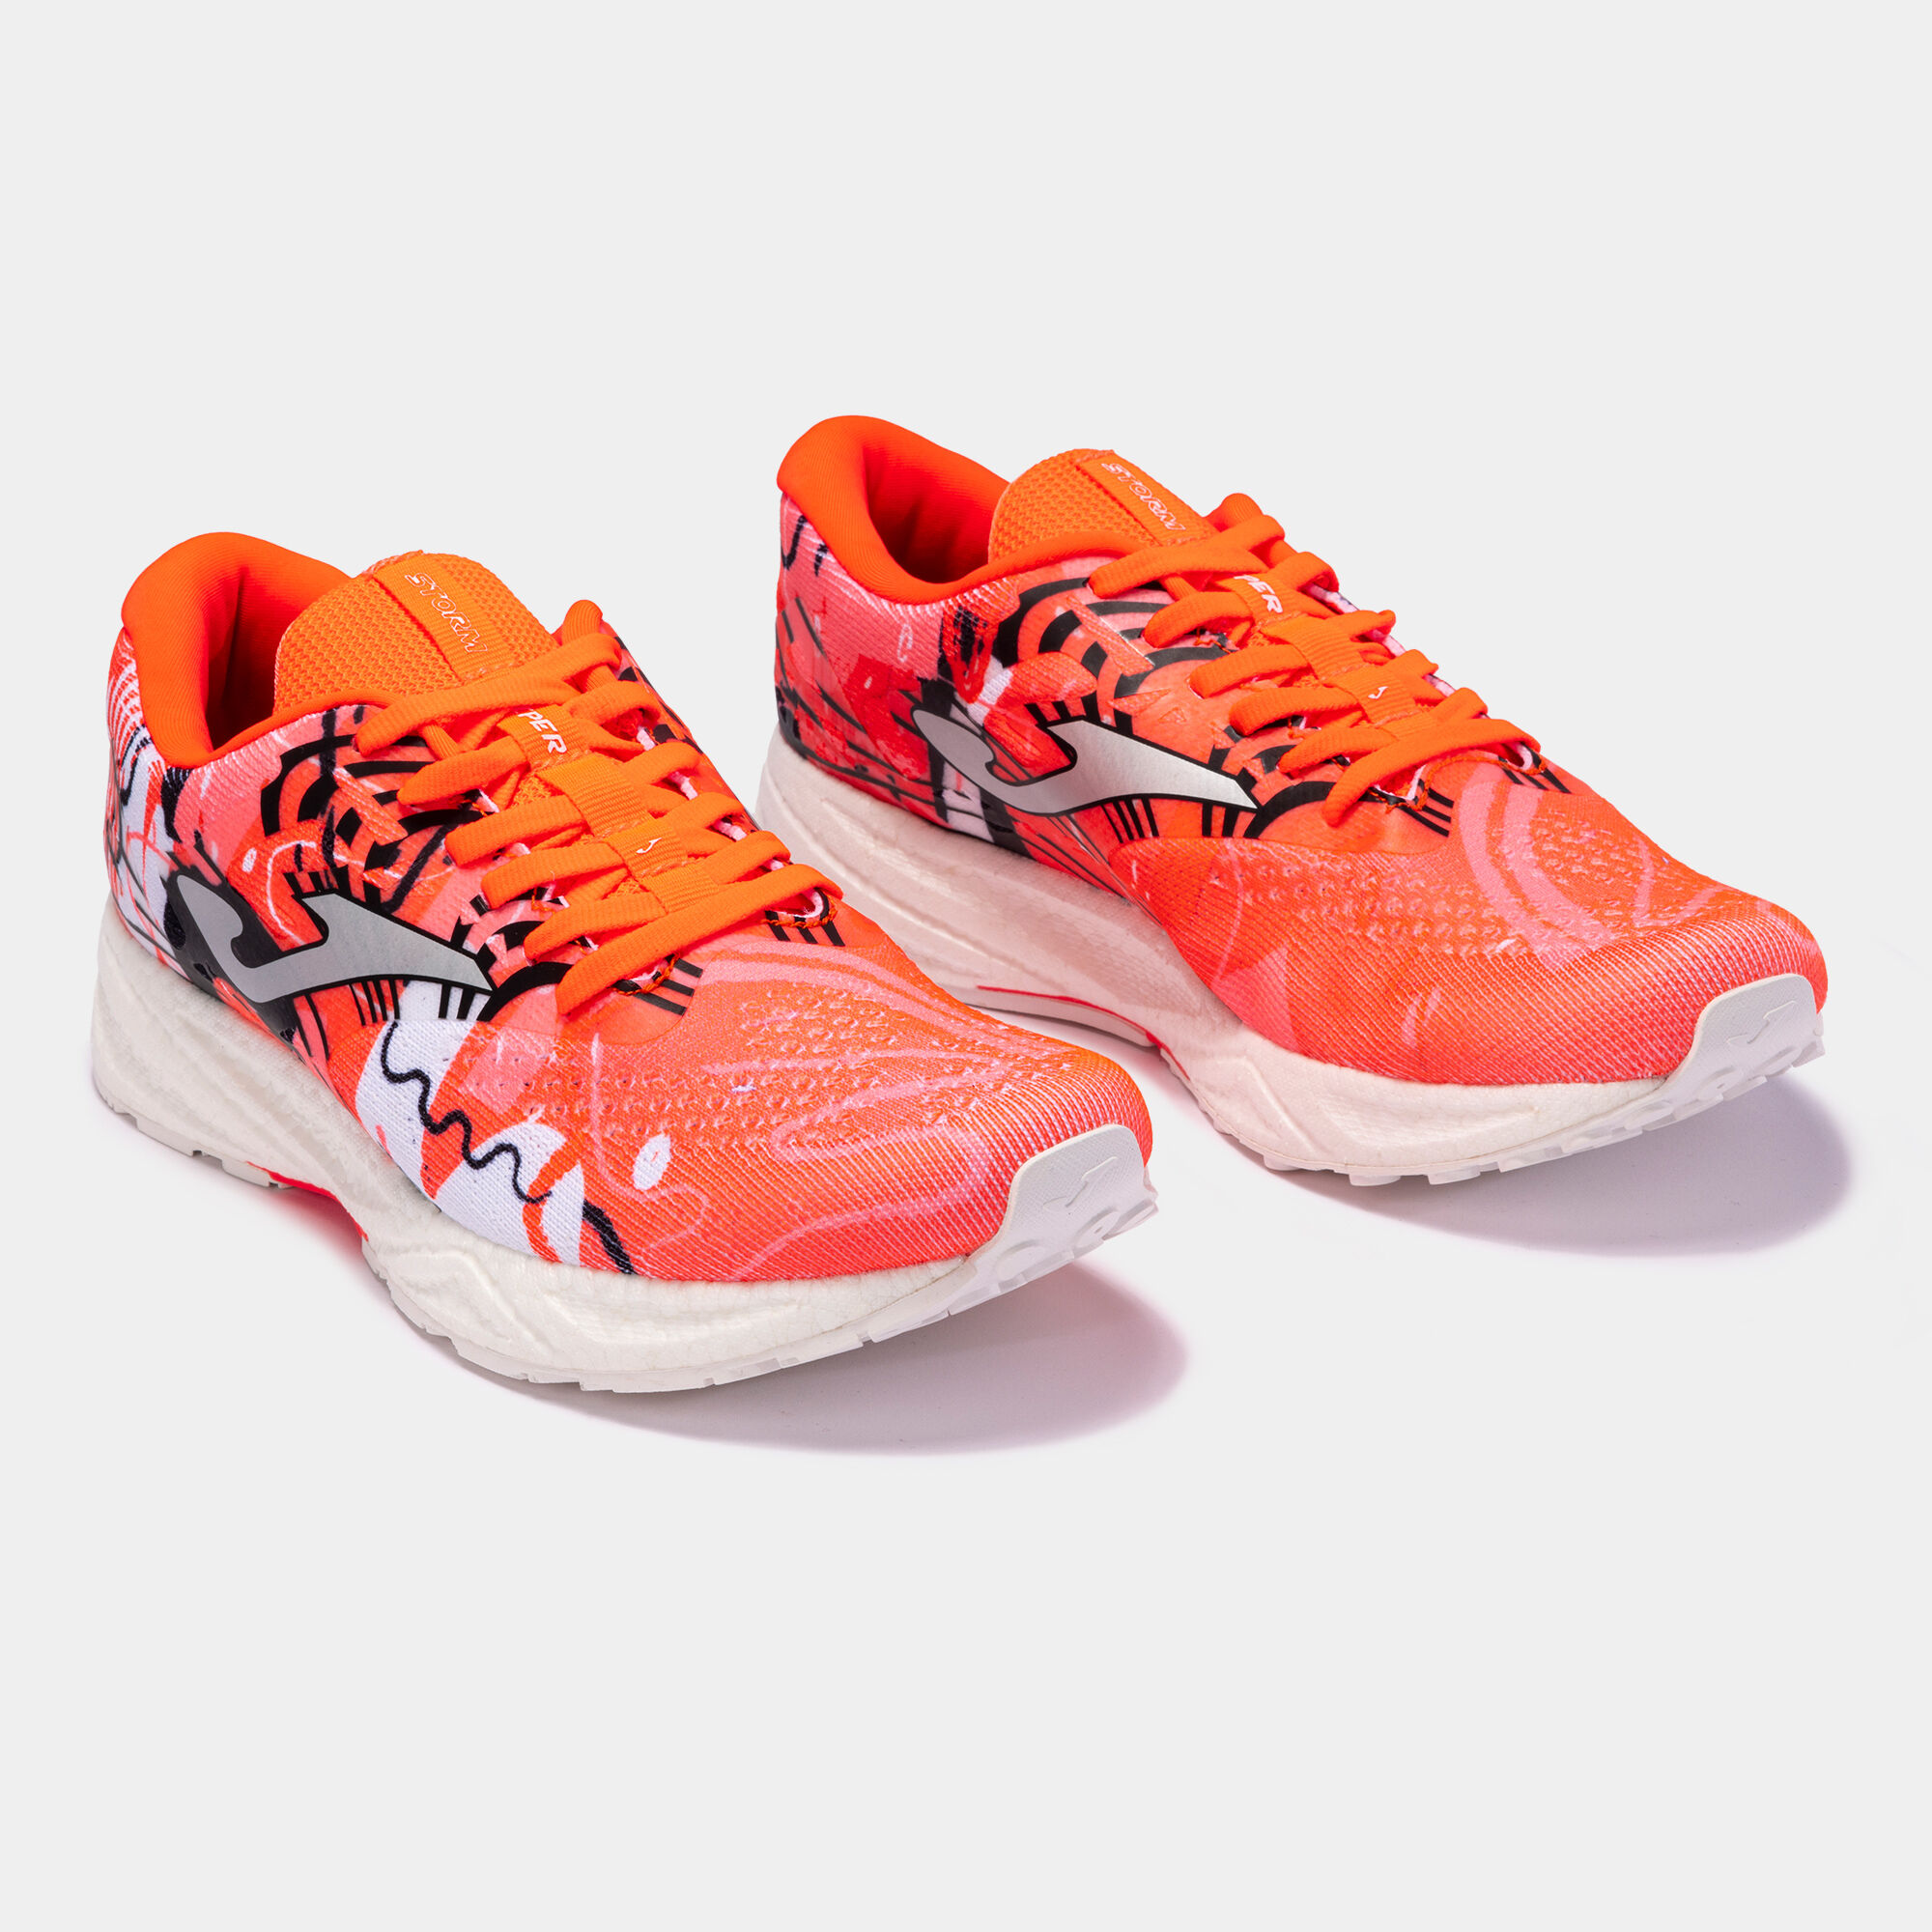 Chaussures running R.Viper Lady 23 femme corail